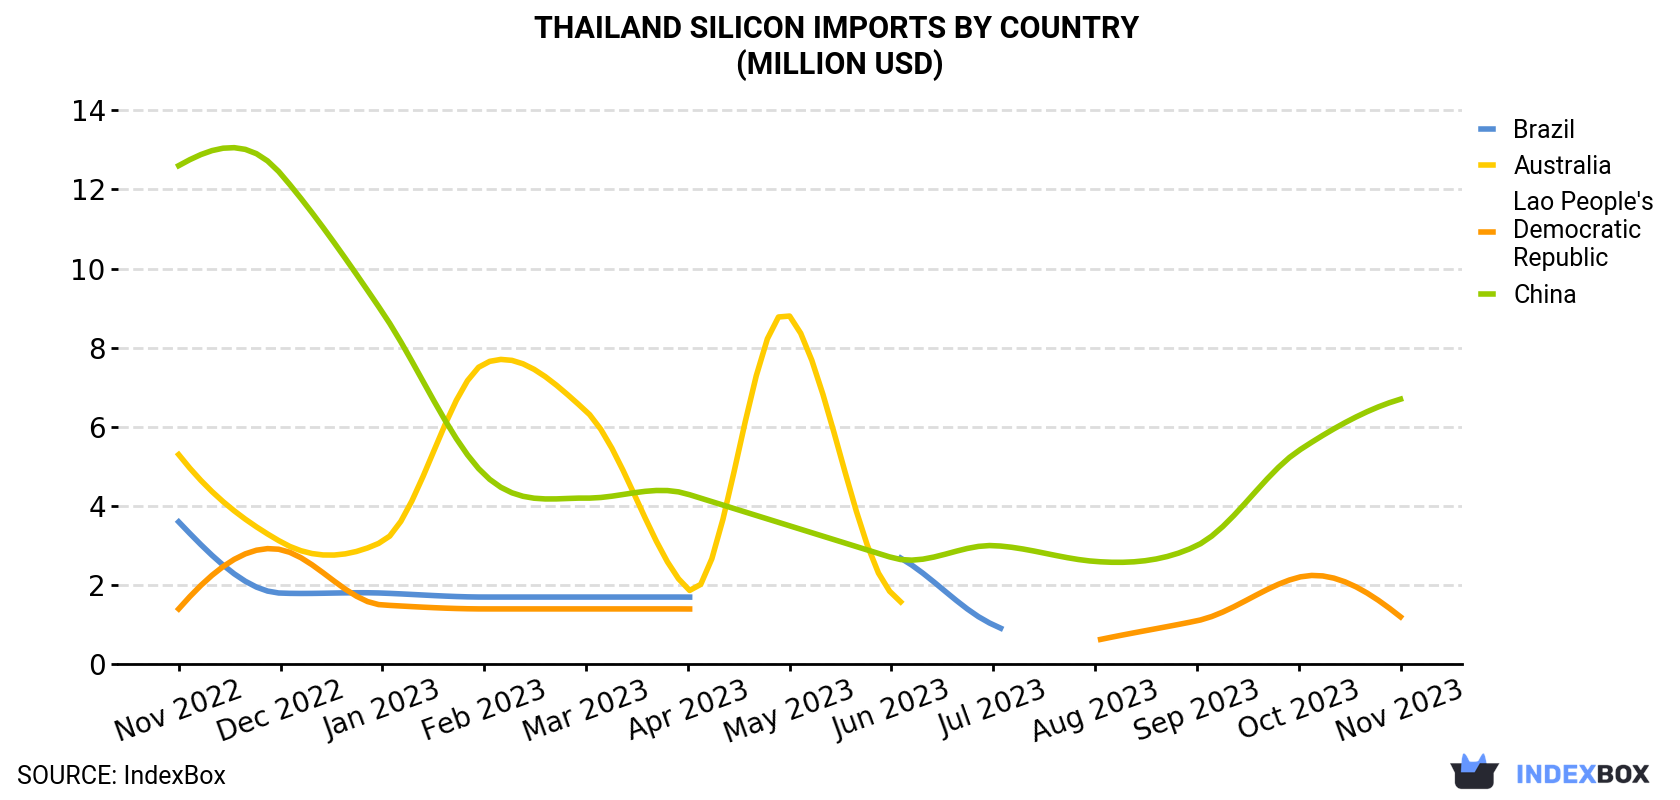 Thailand Silicon Imports By Country (Million USD)